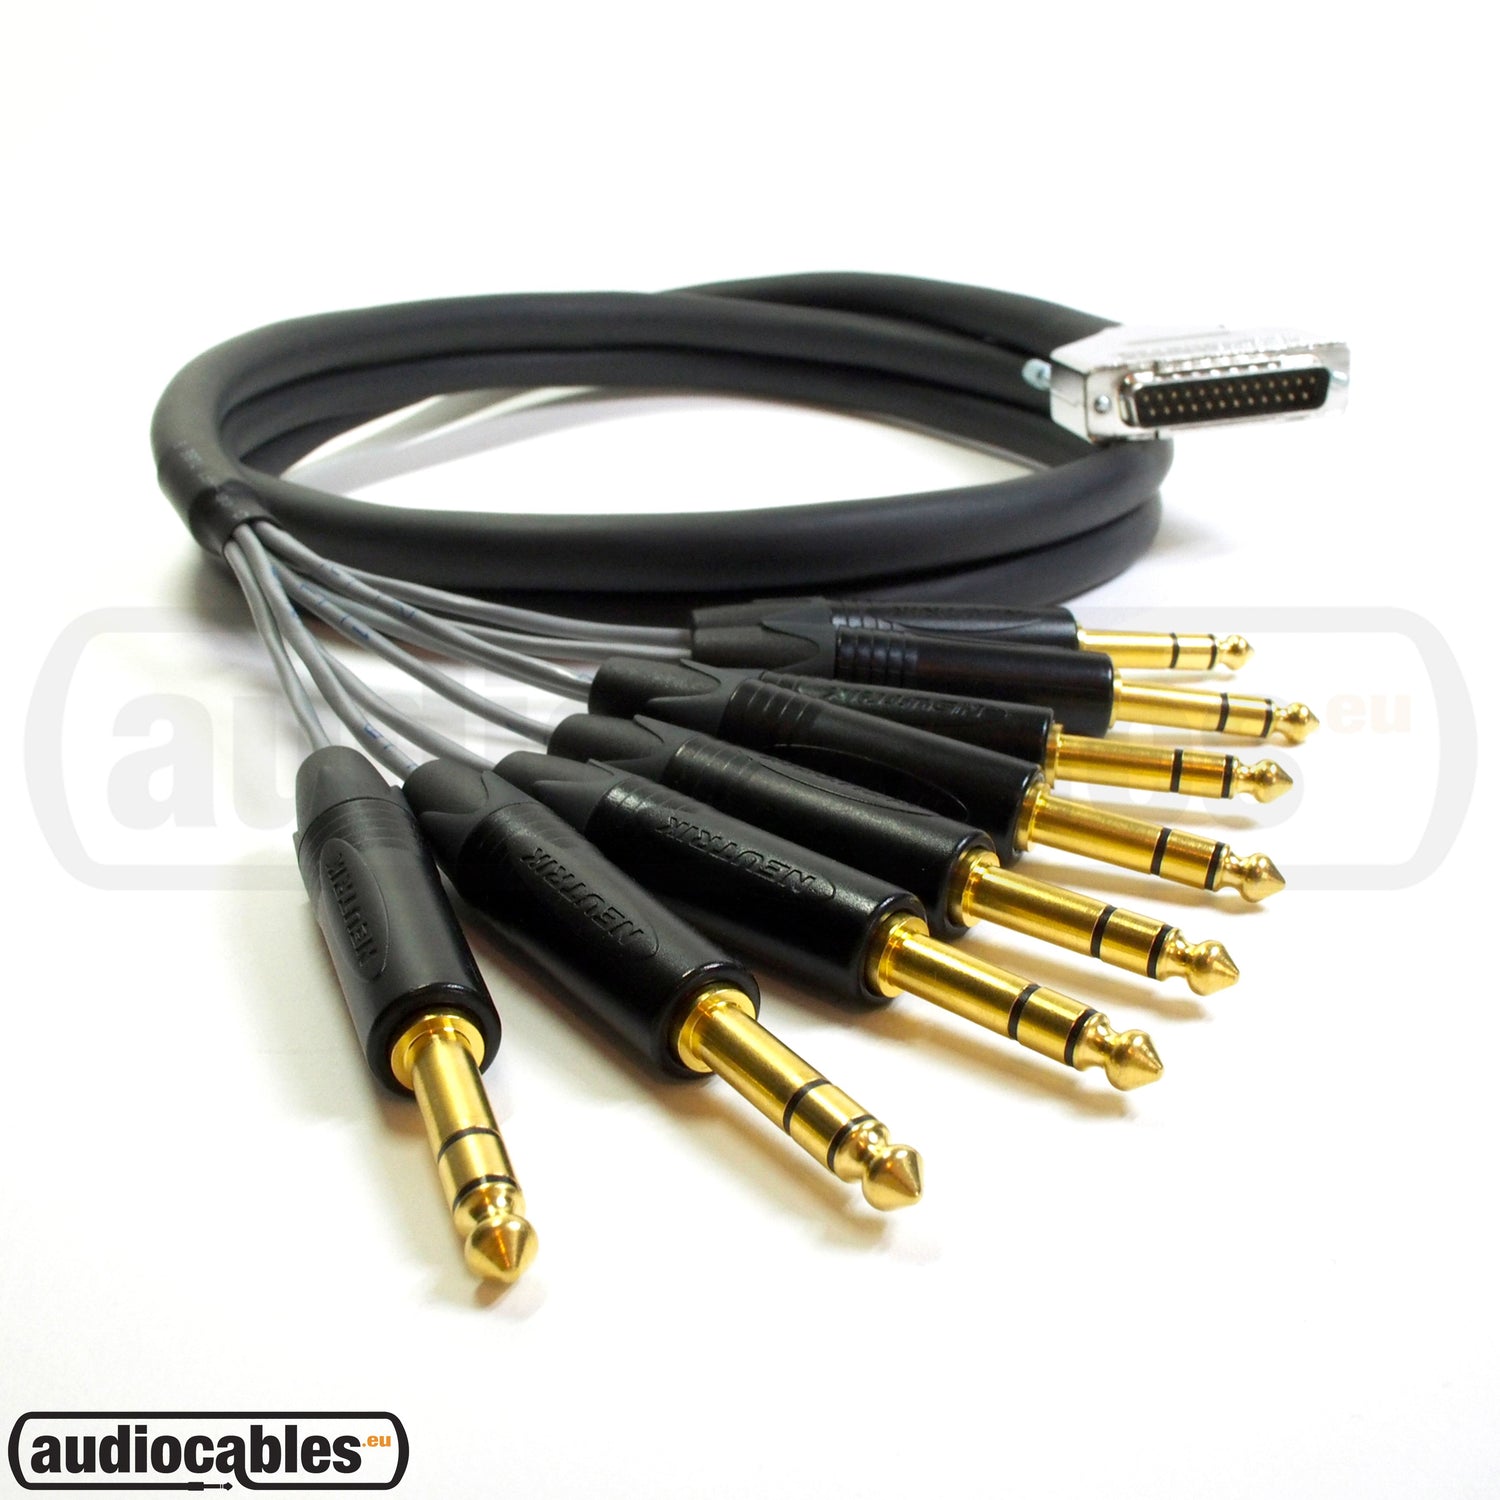 007. Analog Multi Cables